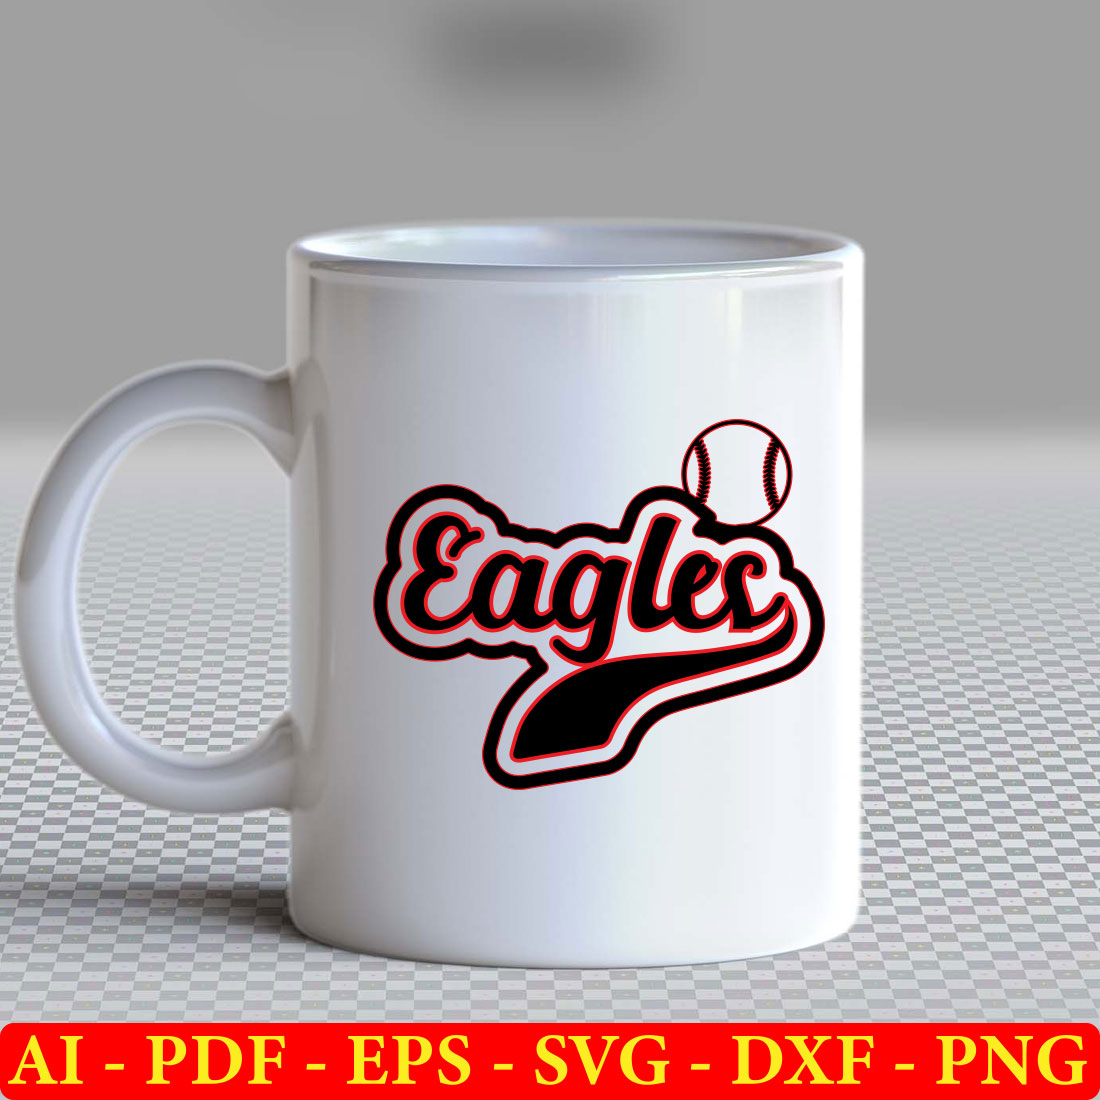 White coffee mug with the word eagles on it.